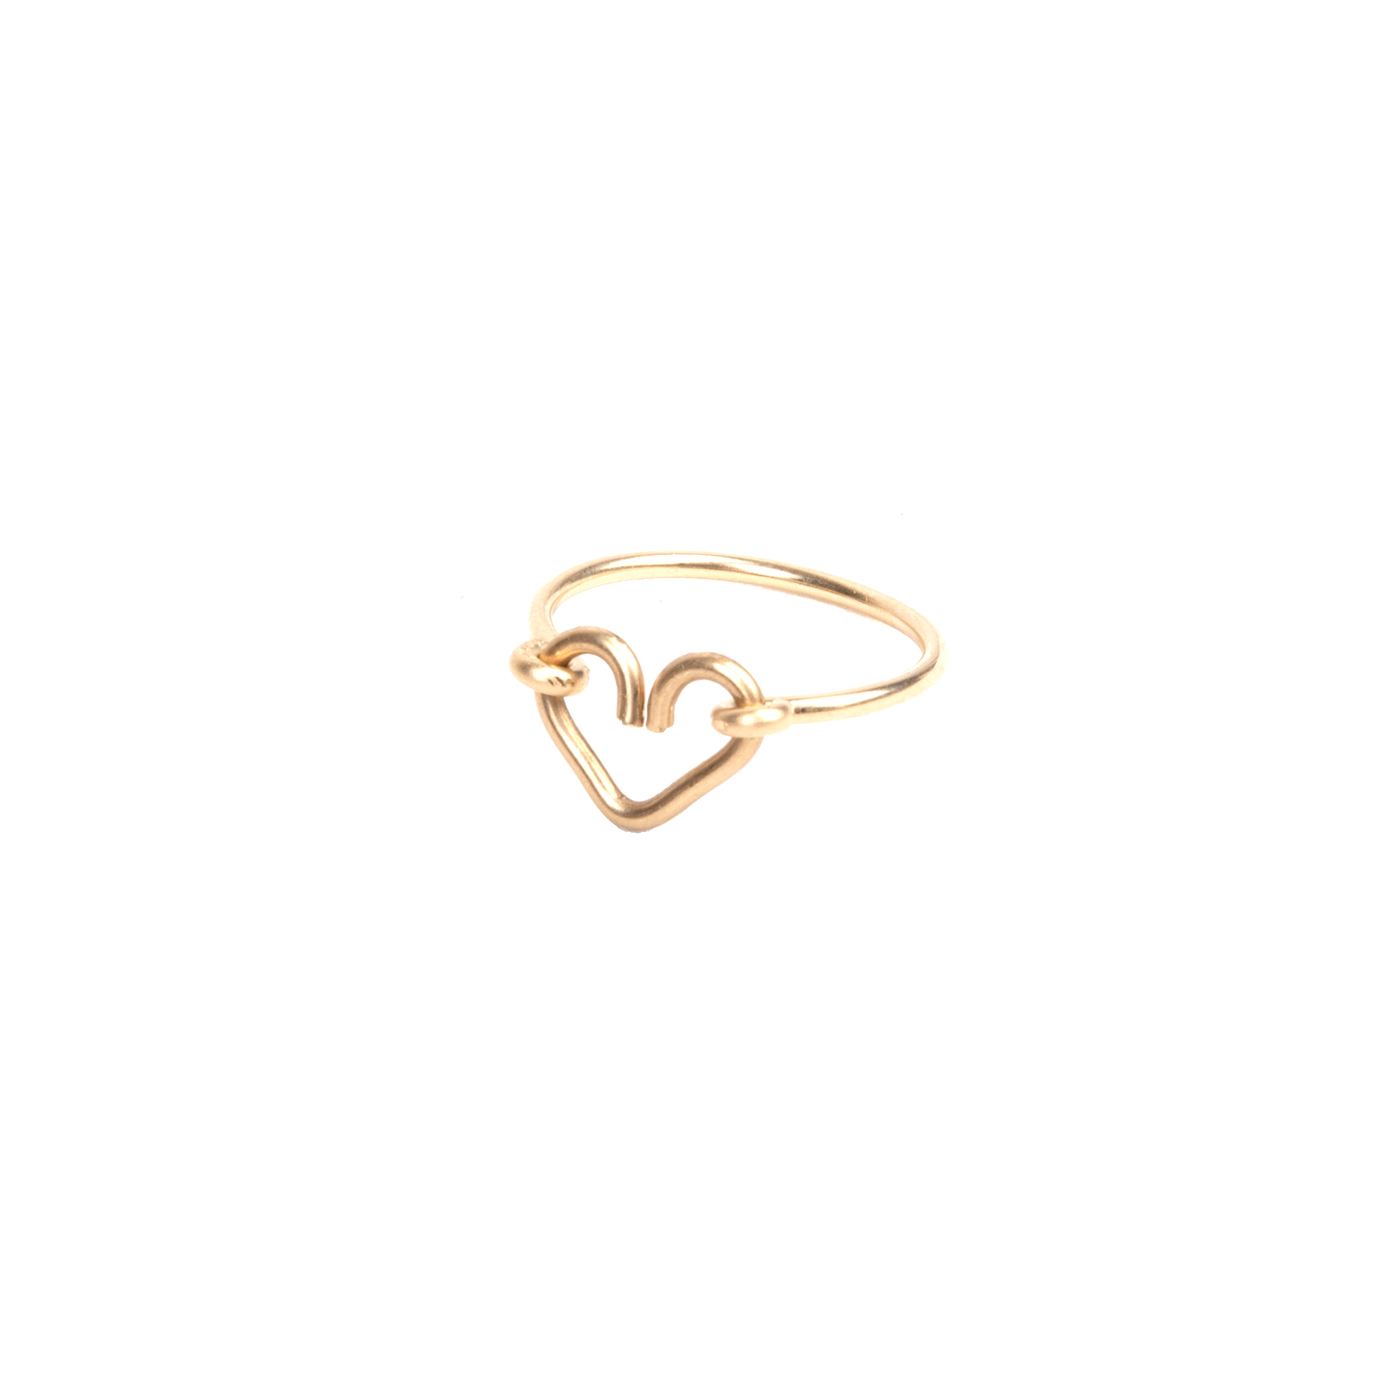 Corazon Solitaire Ring (12mm) - Yellow Gold - By Boho Hunter